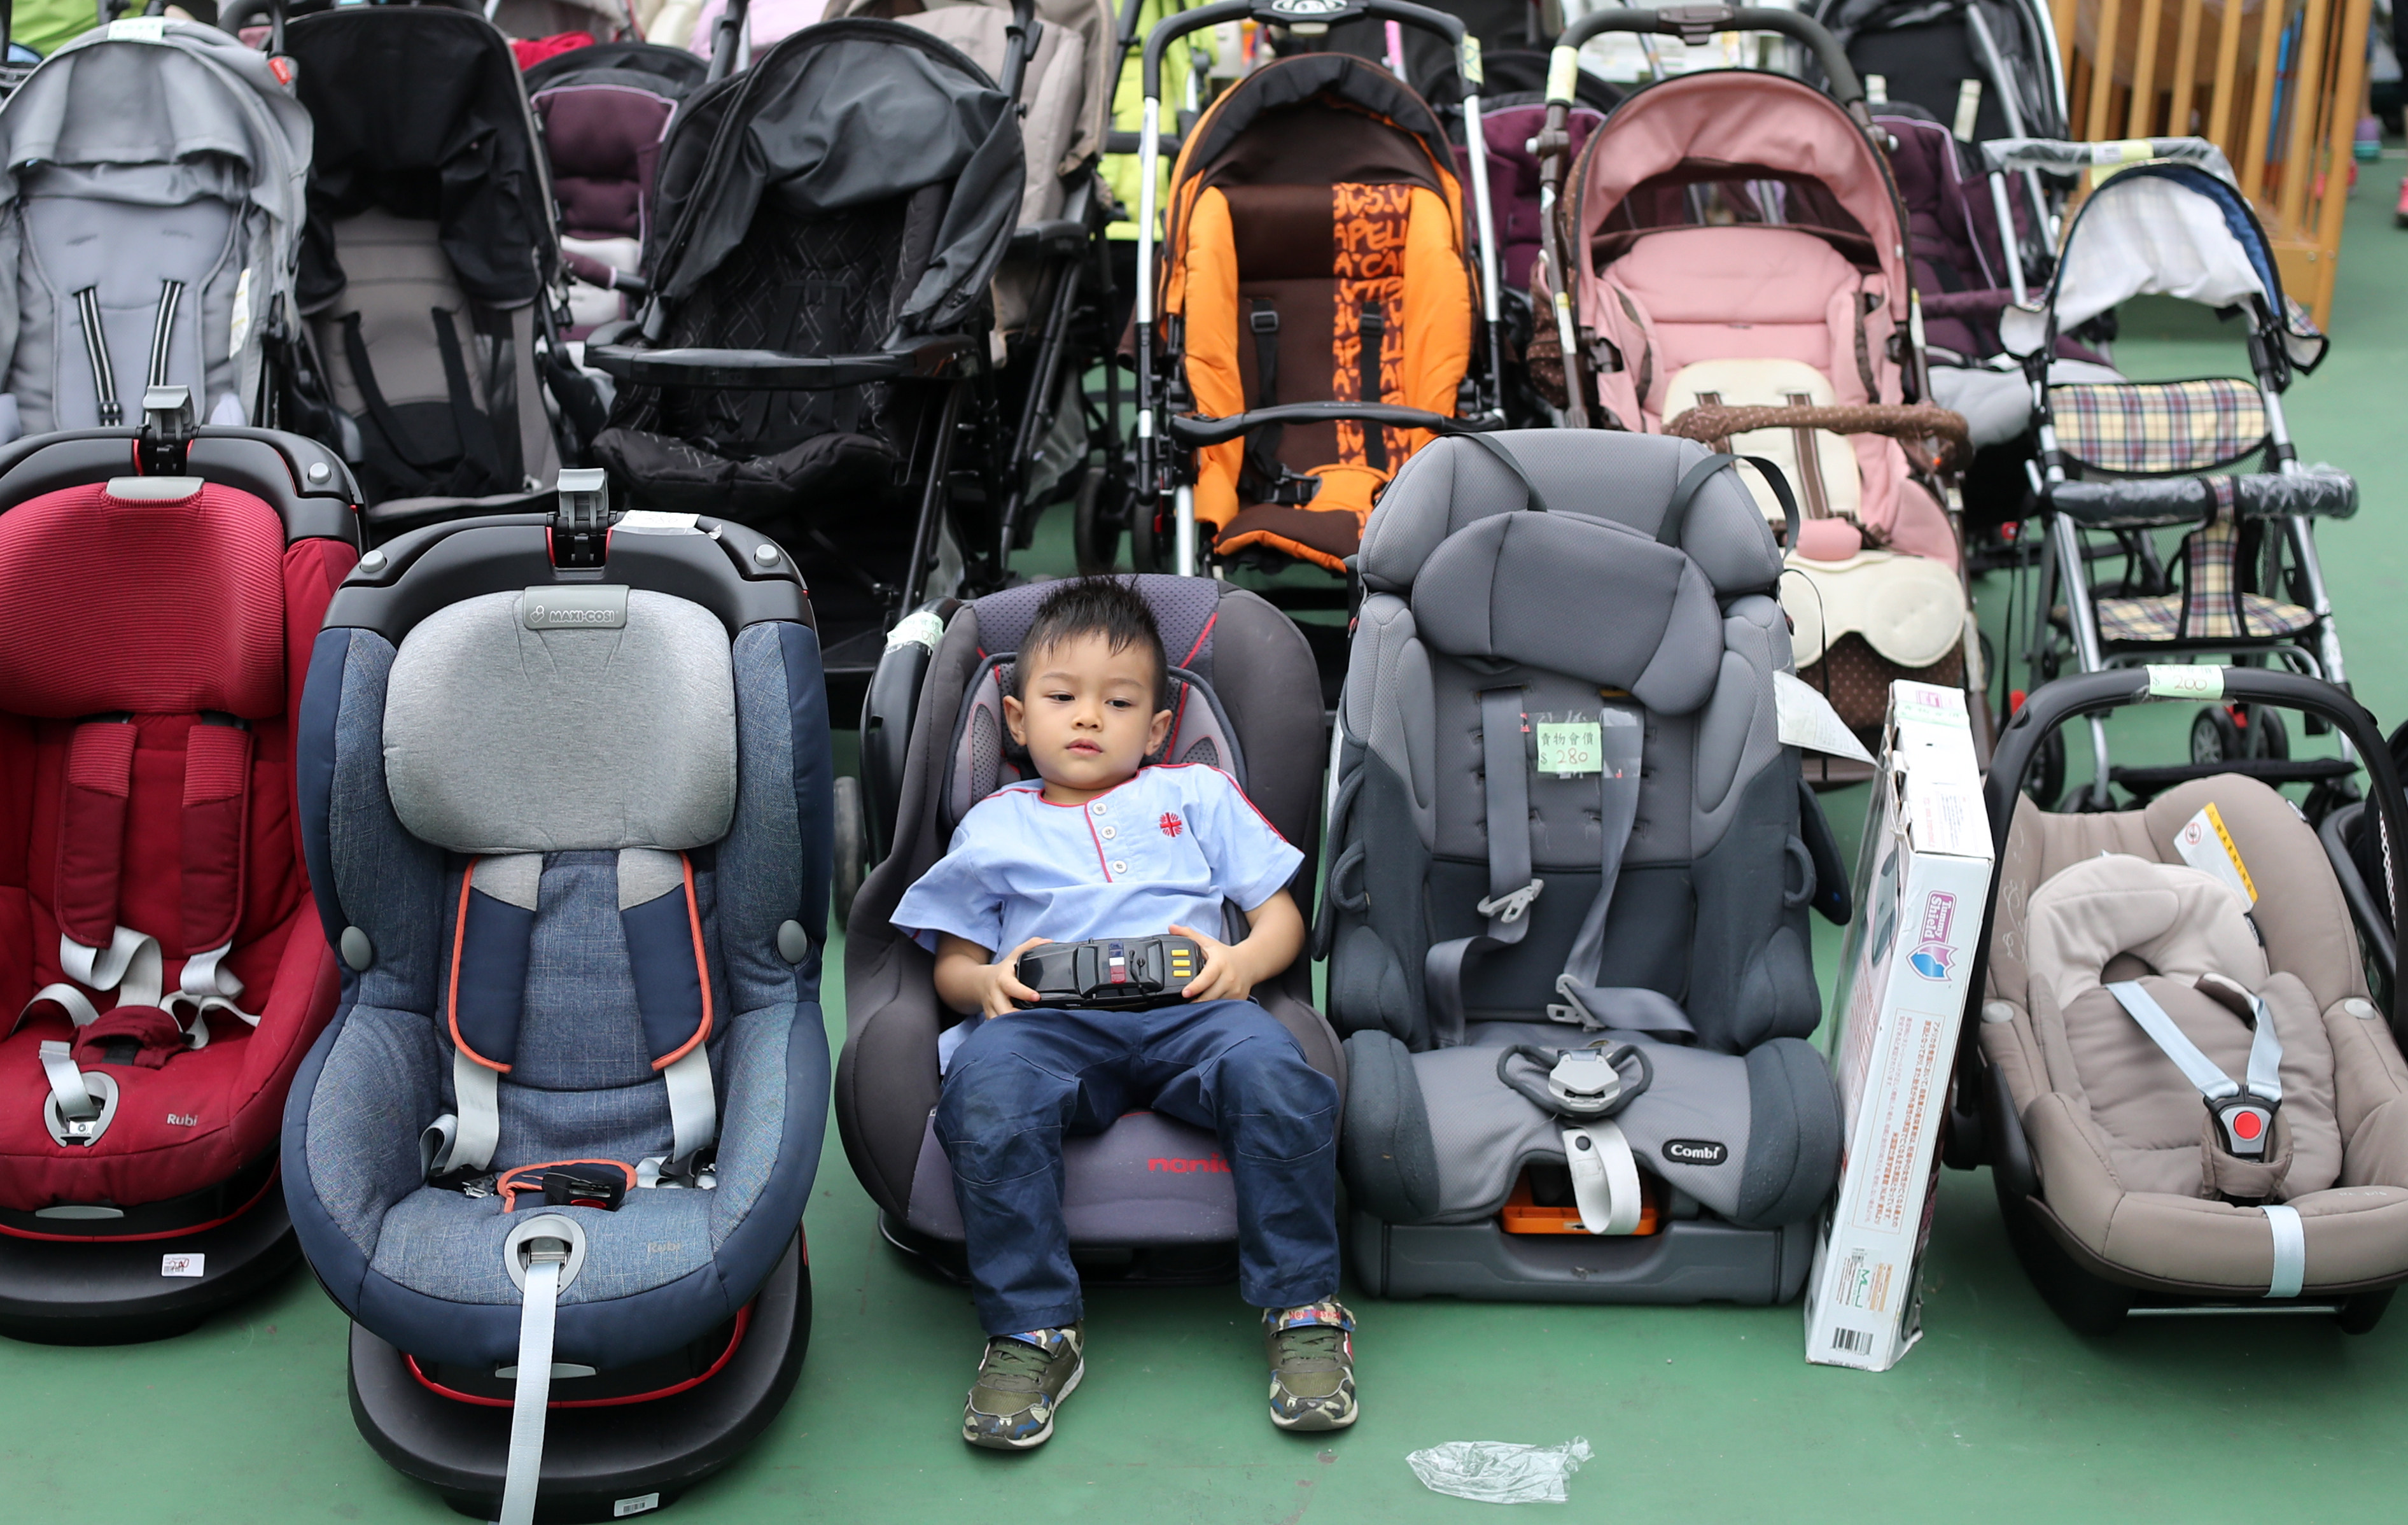 A child sits in a baby seat at a charity bazaar at Hong Kong’s Victoria Park in November 2018. Under current legislation, children under three years old and sitting in the front seat must use child safety seats, while children sitting at the back and children above three years old are not required to do so. Photo: Winson Wong